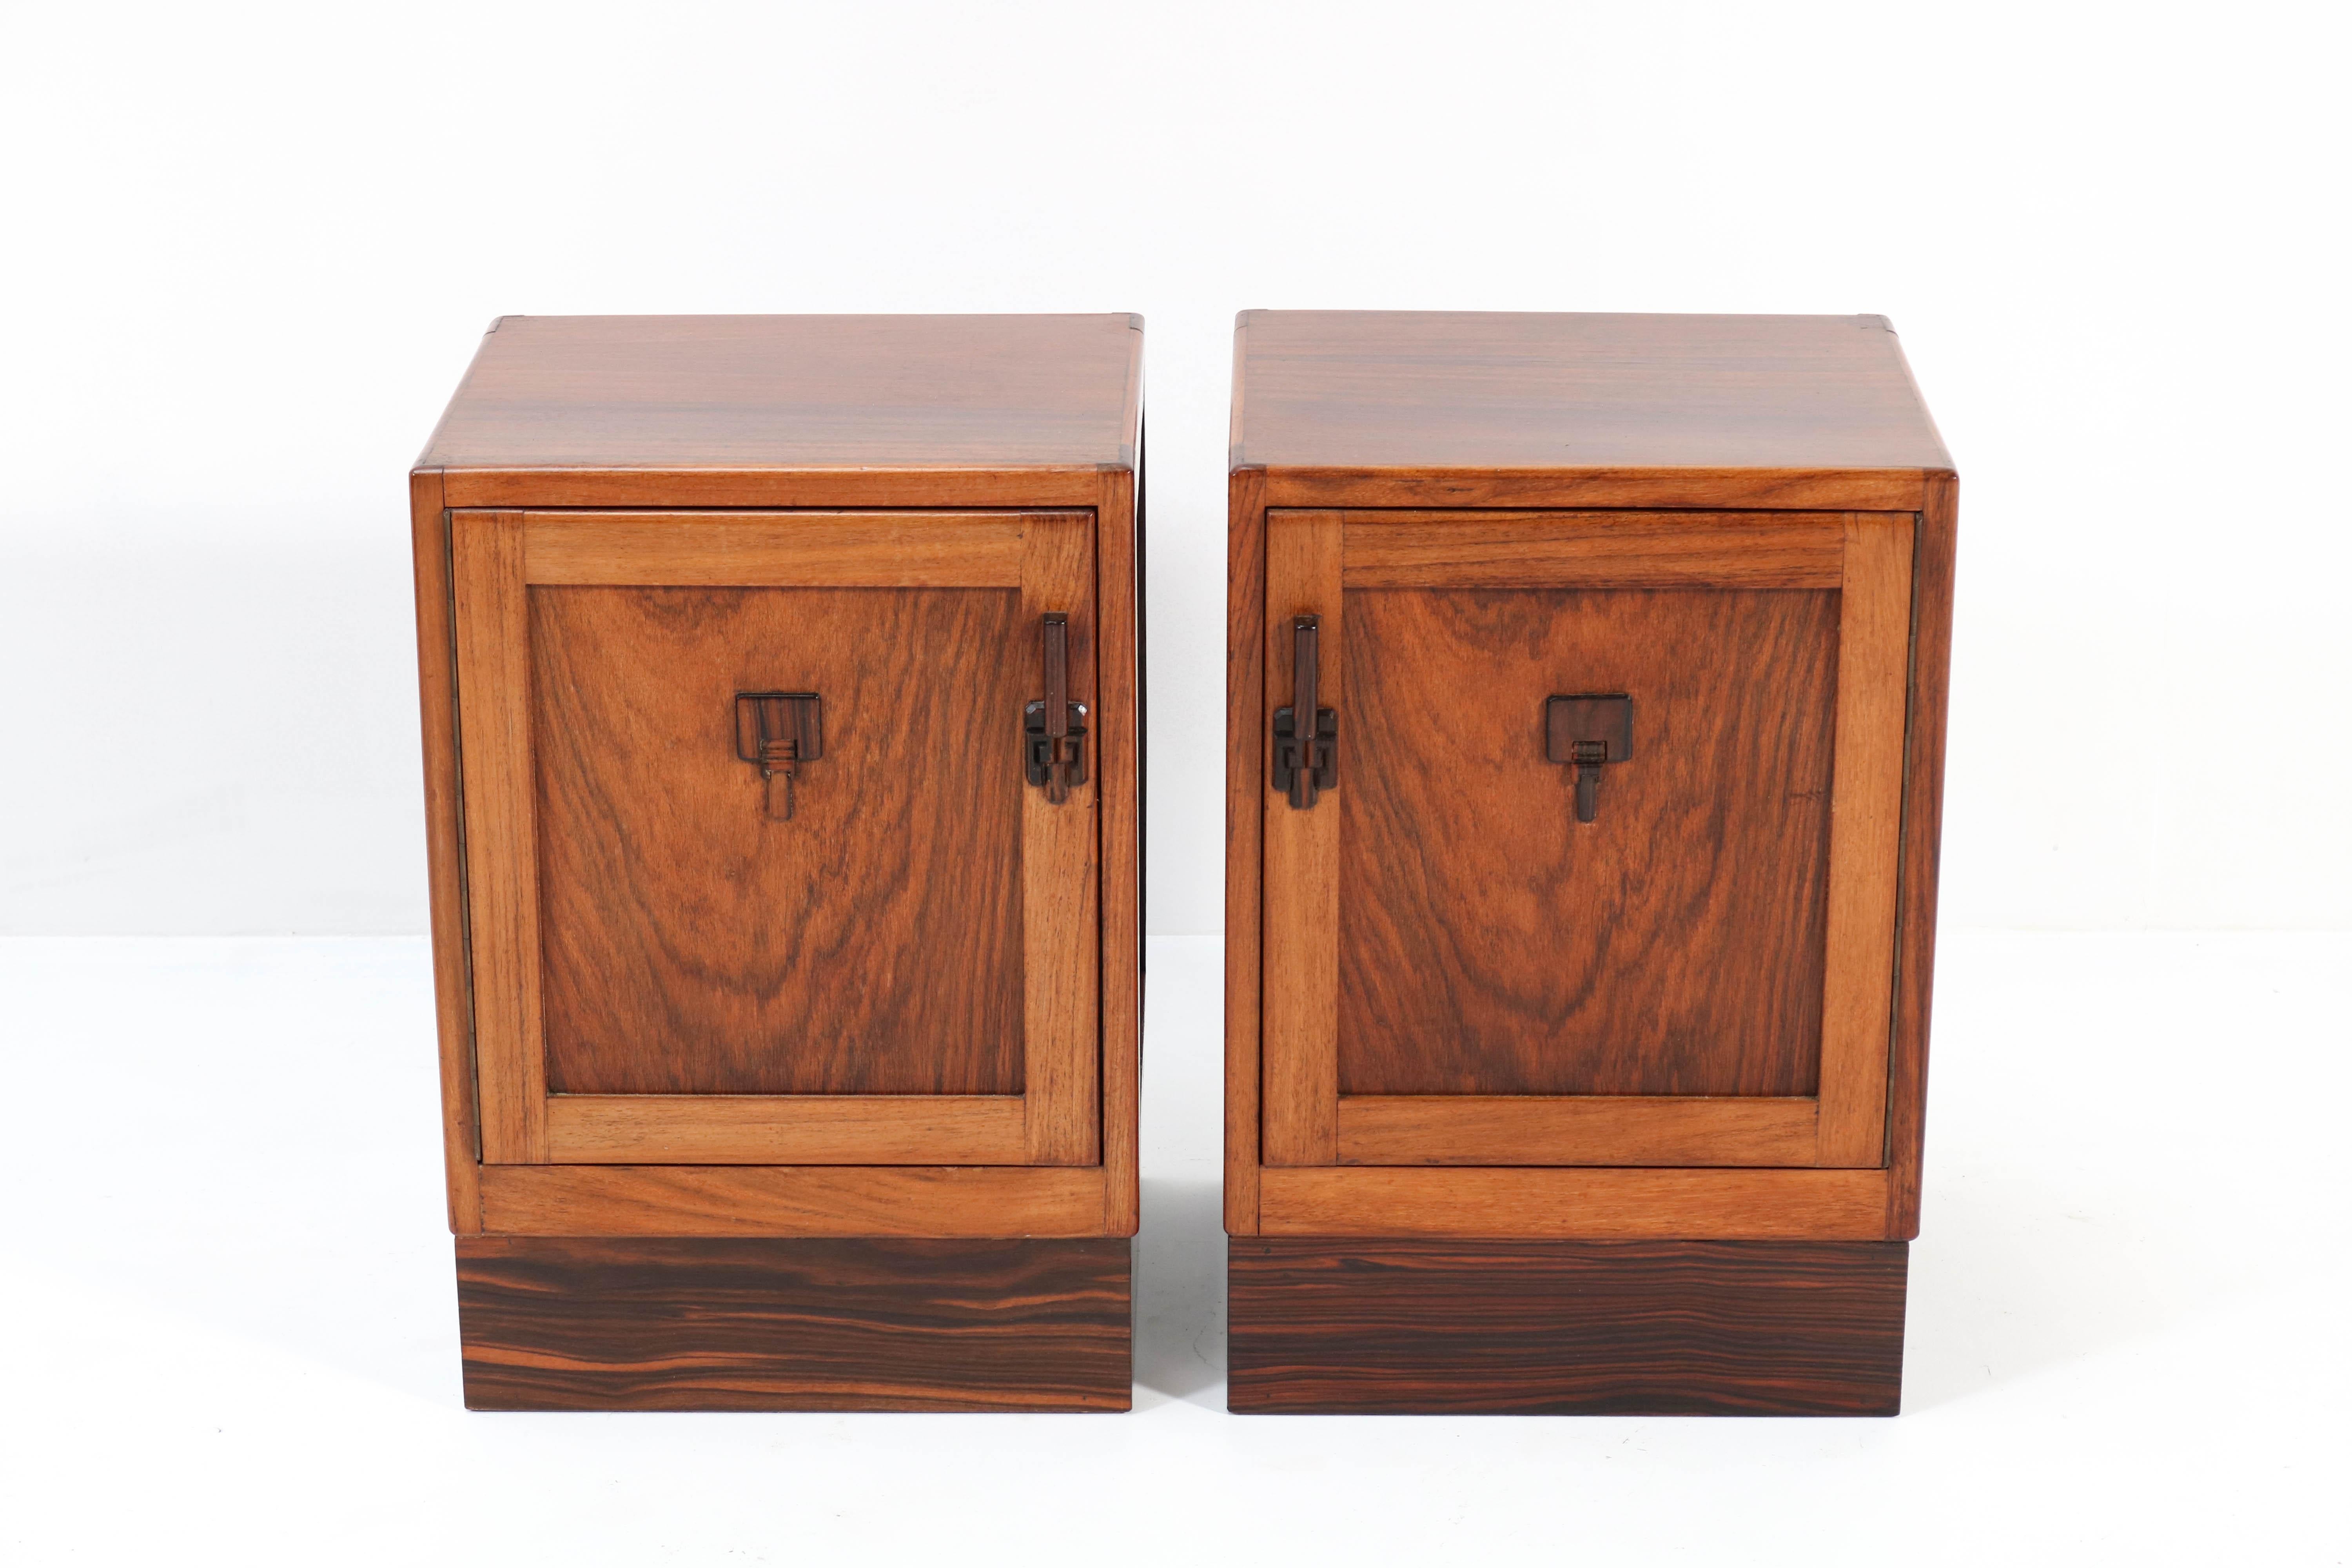 Wonderful pair of Art Deco Amsterdam School nightstands or bedside tables.
Striking Dutch design from the 1920s.
Walnut with solid Macassar ebony handles.
In good original condition with minor wear consistent with age and use,
preserving a